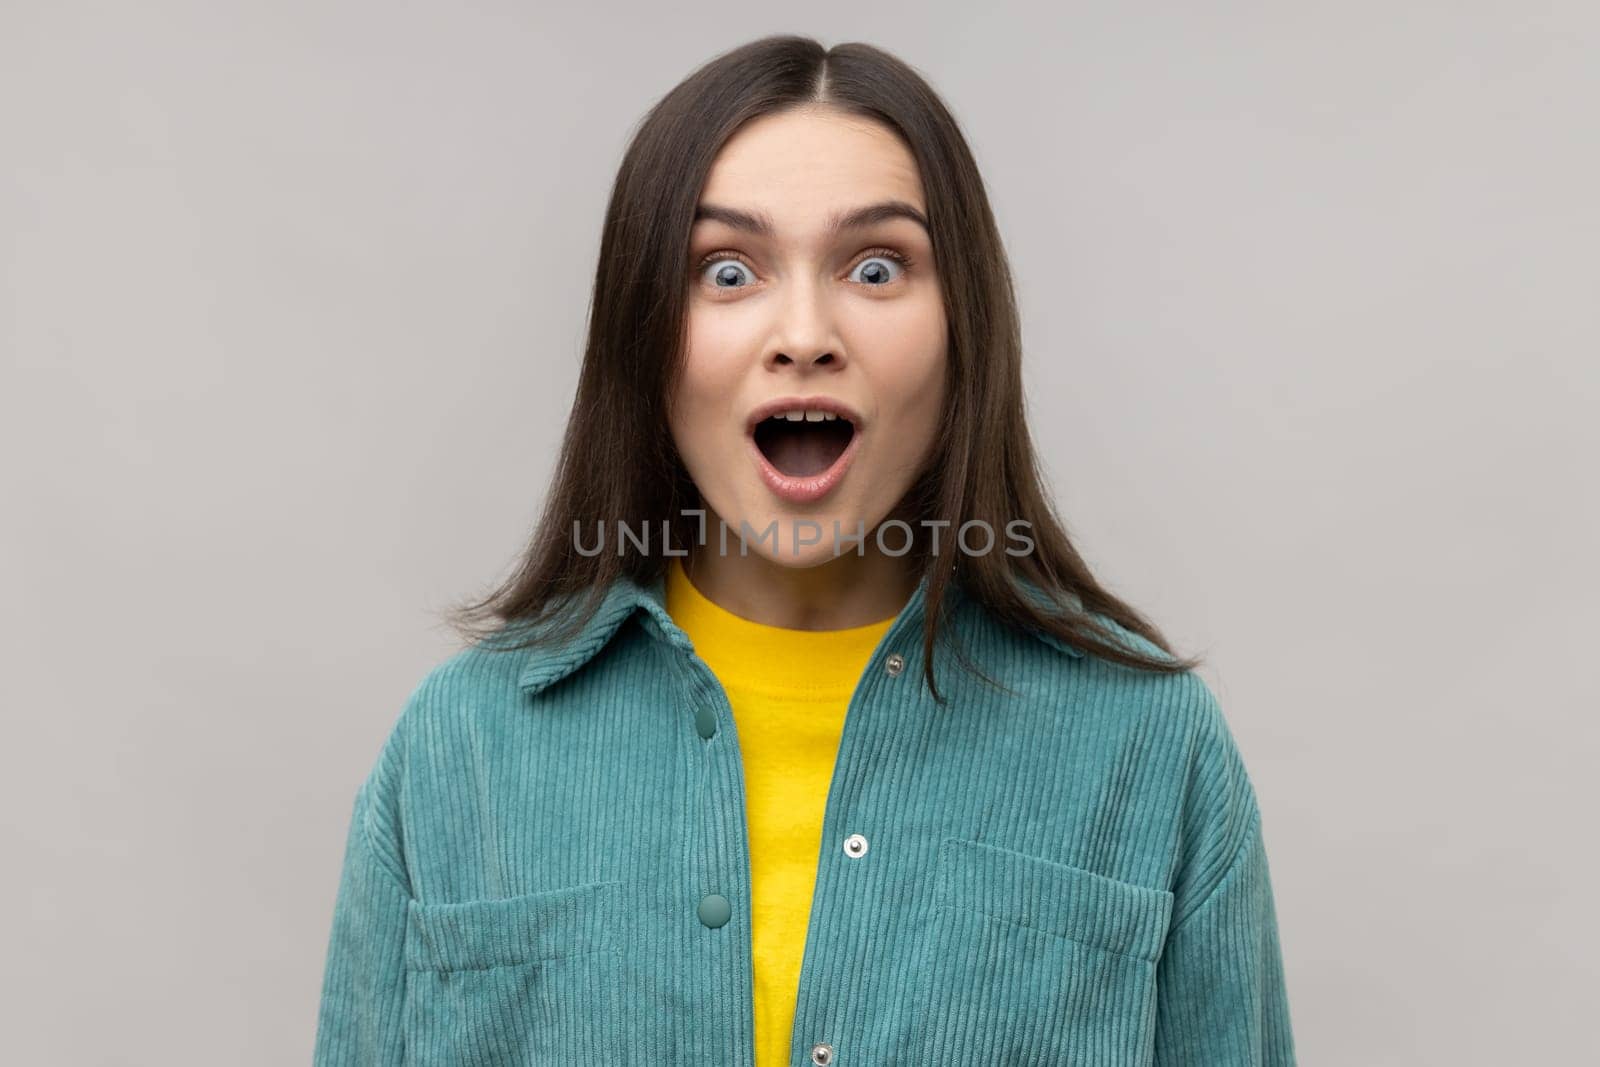 Portrait of astonished woman with widely open mouth in amazement and big eyes looking at camera, stunned shocked face, wearing casual style jacket. Indoor studio shot isolated on gray background.